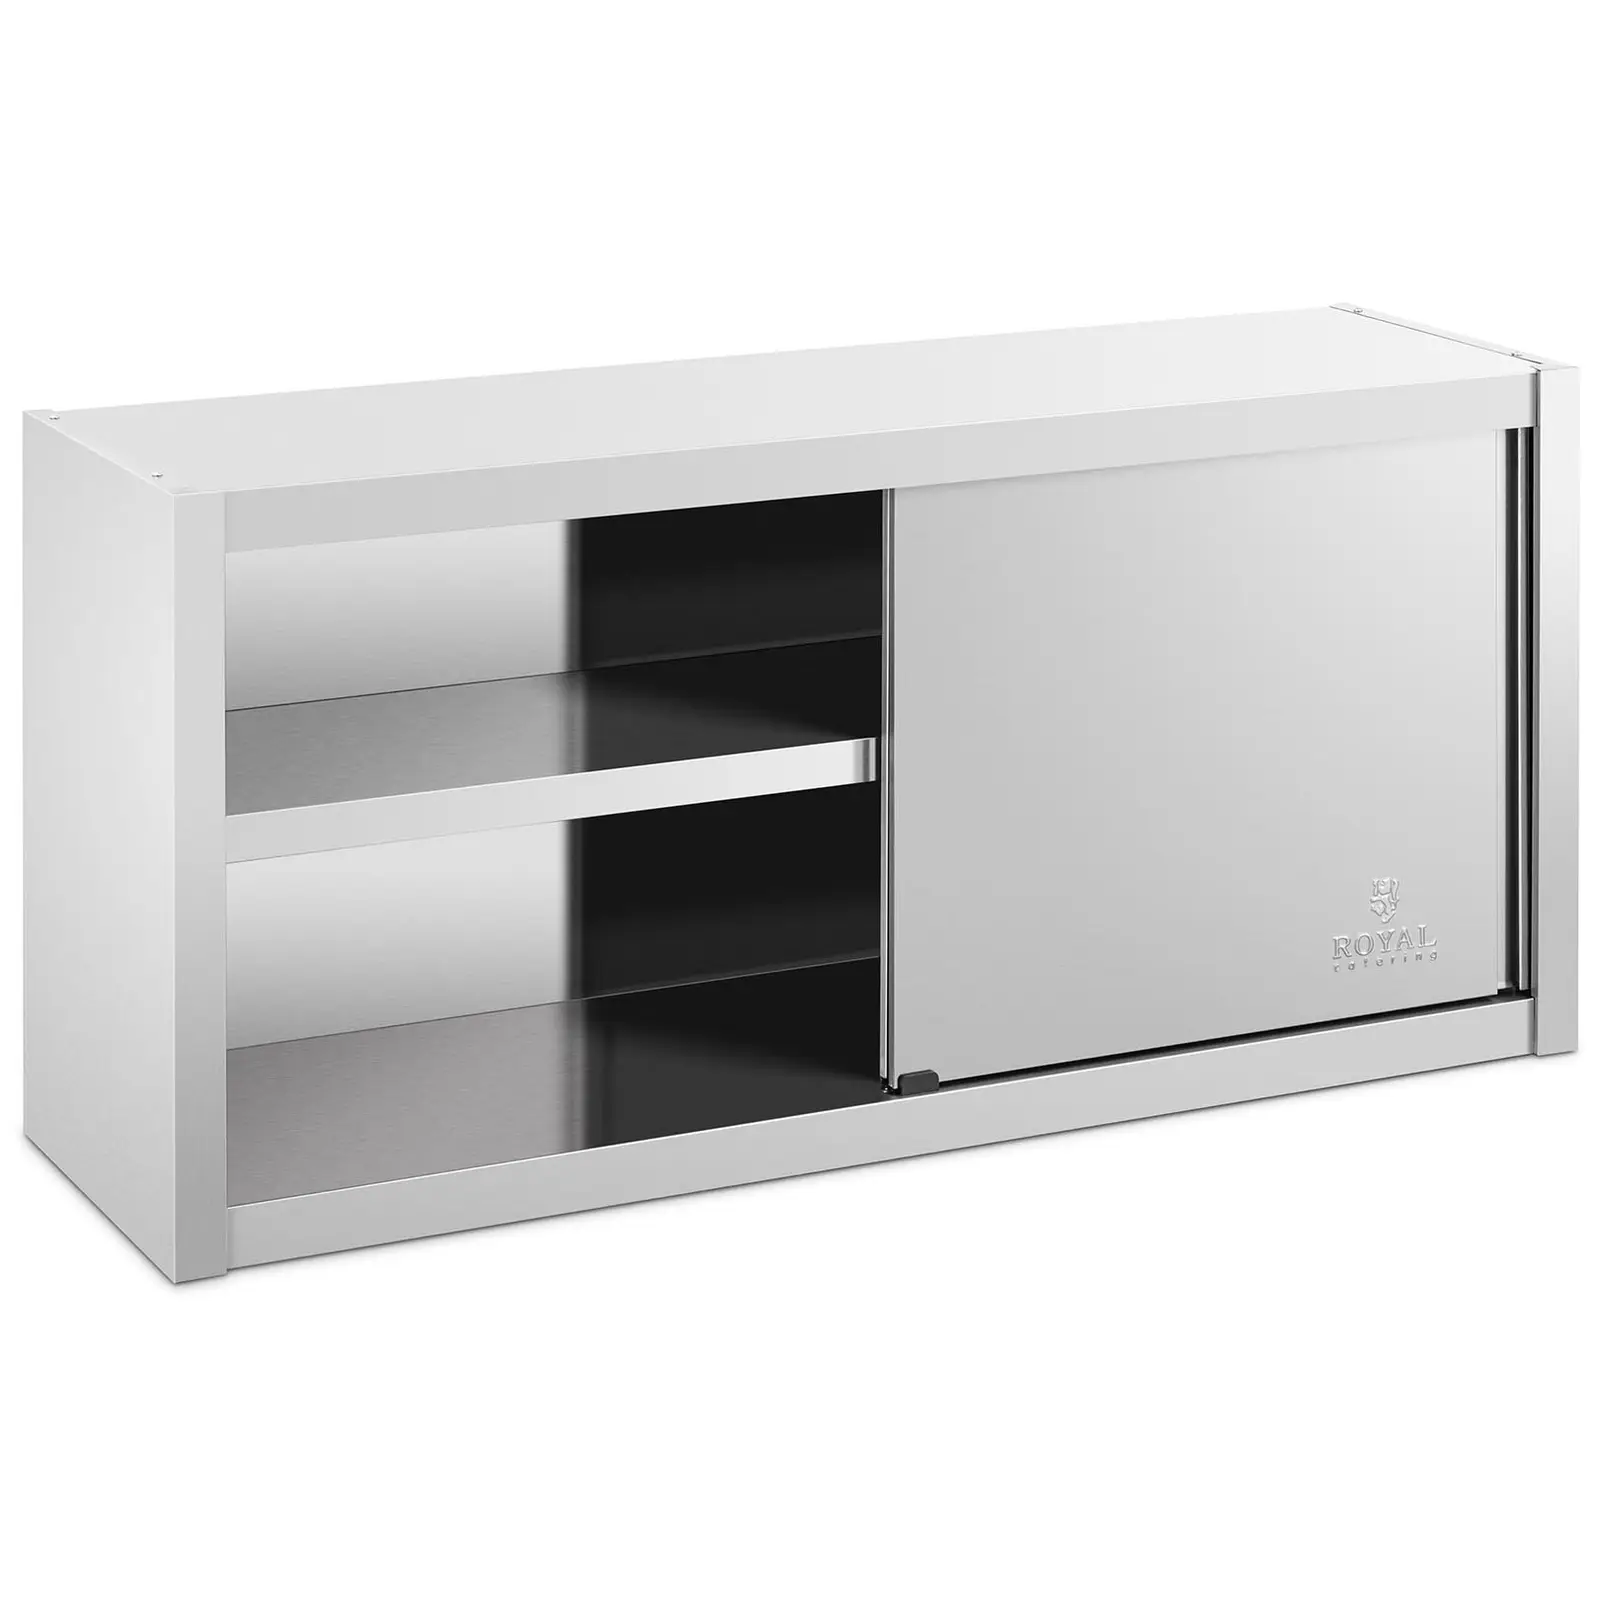 Stainless Steel Hanging Cabinet - 120 x 45 cm